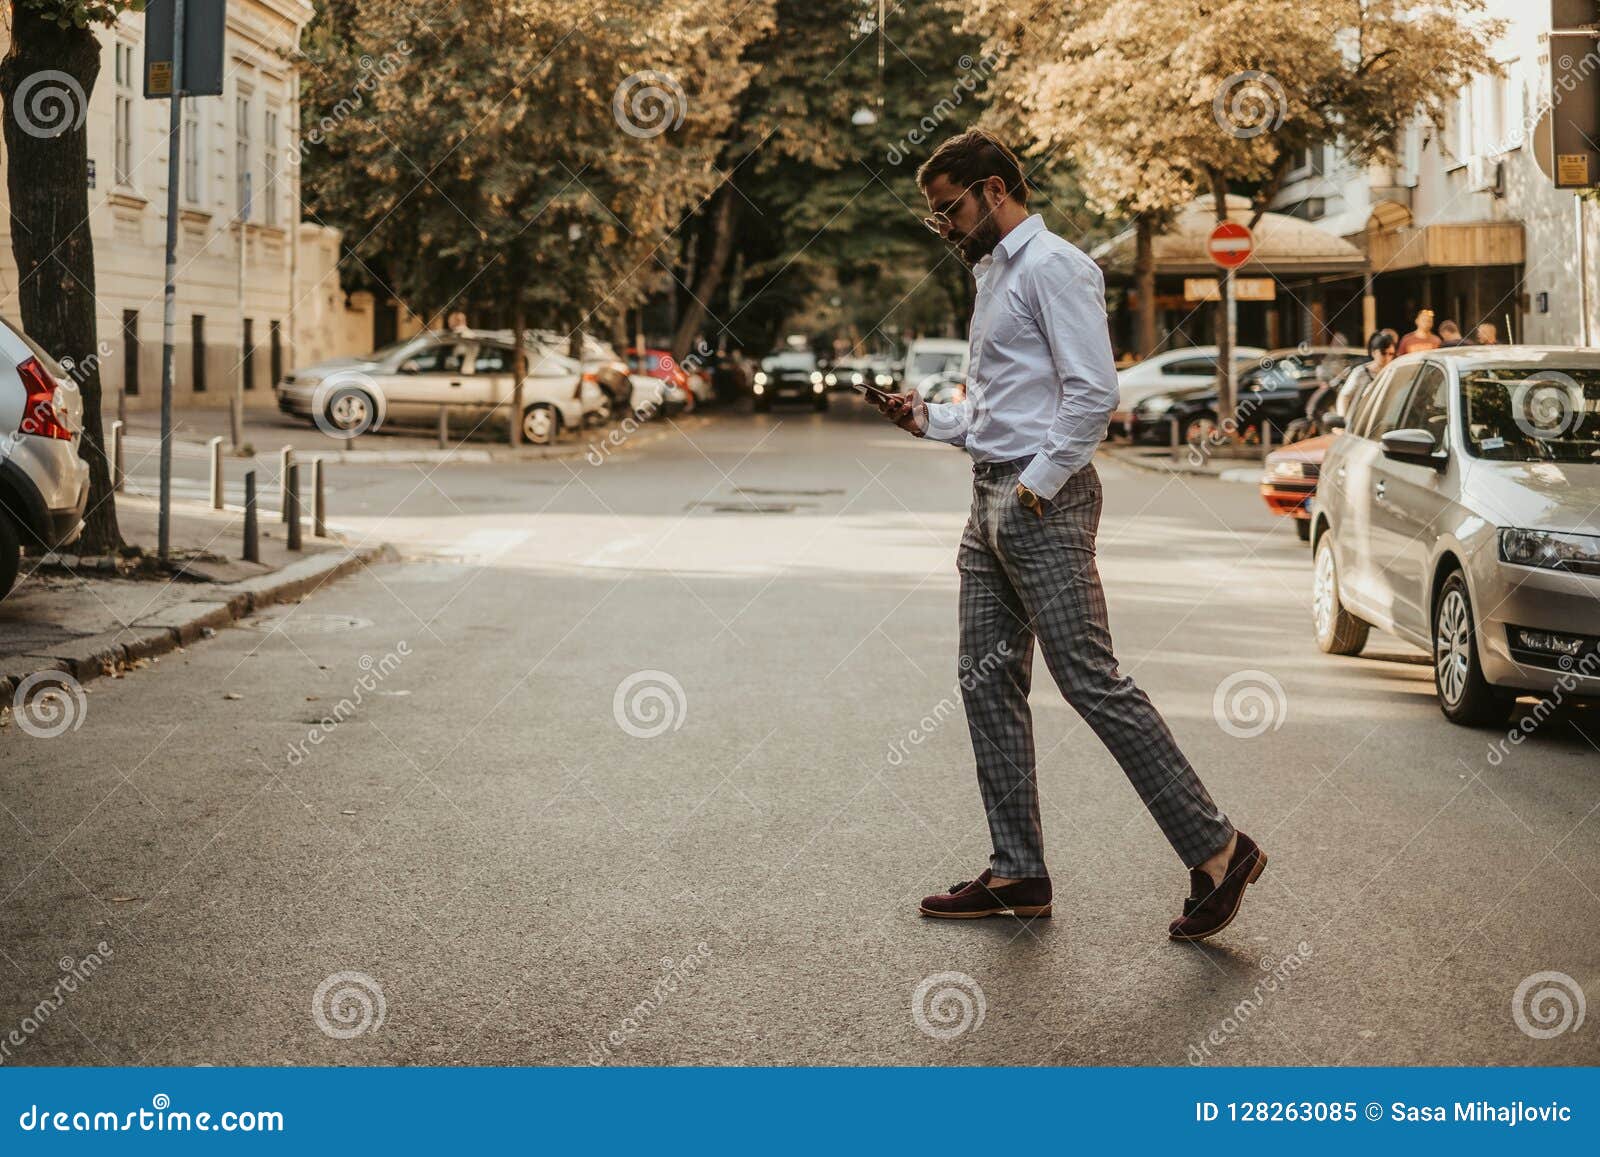 Man on mobile phone cross the road at a pedestrian crossing. Ho